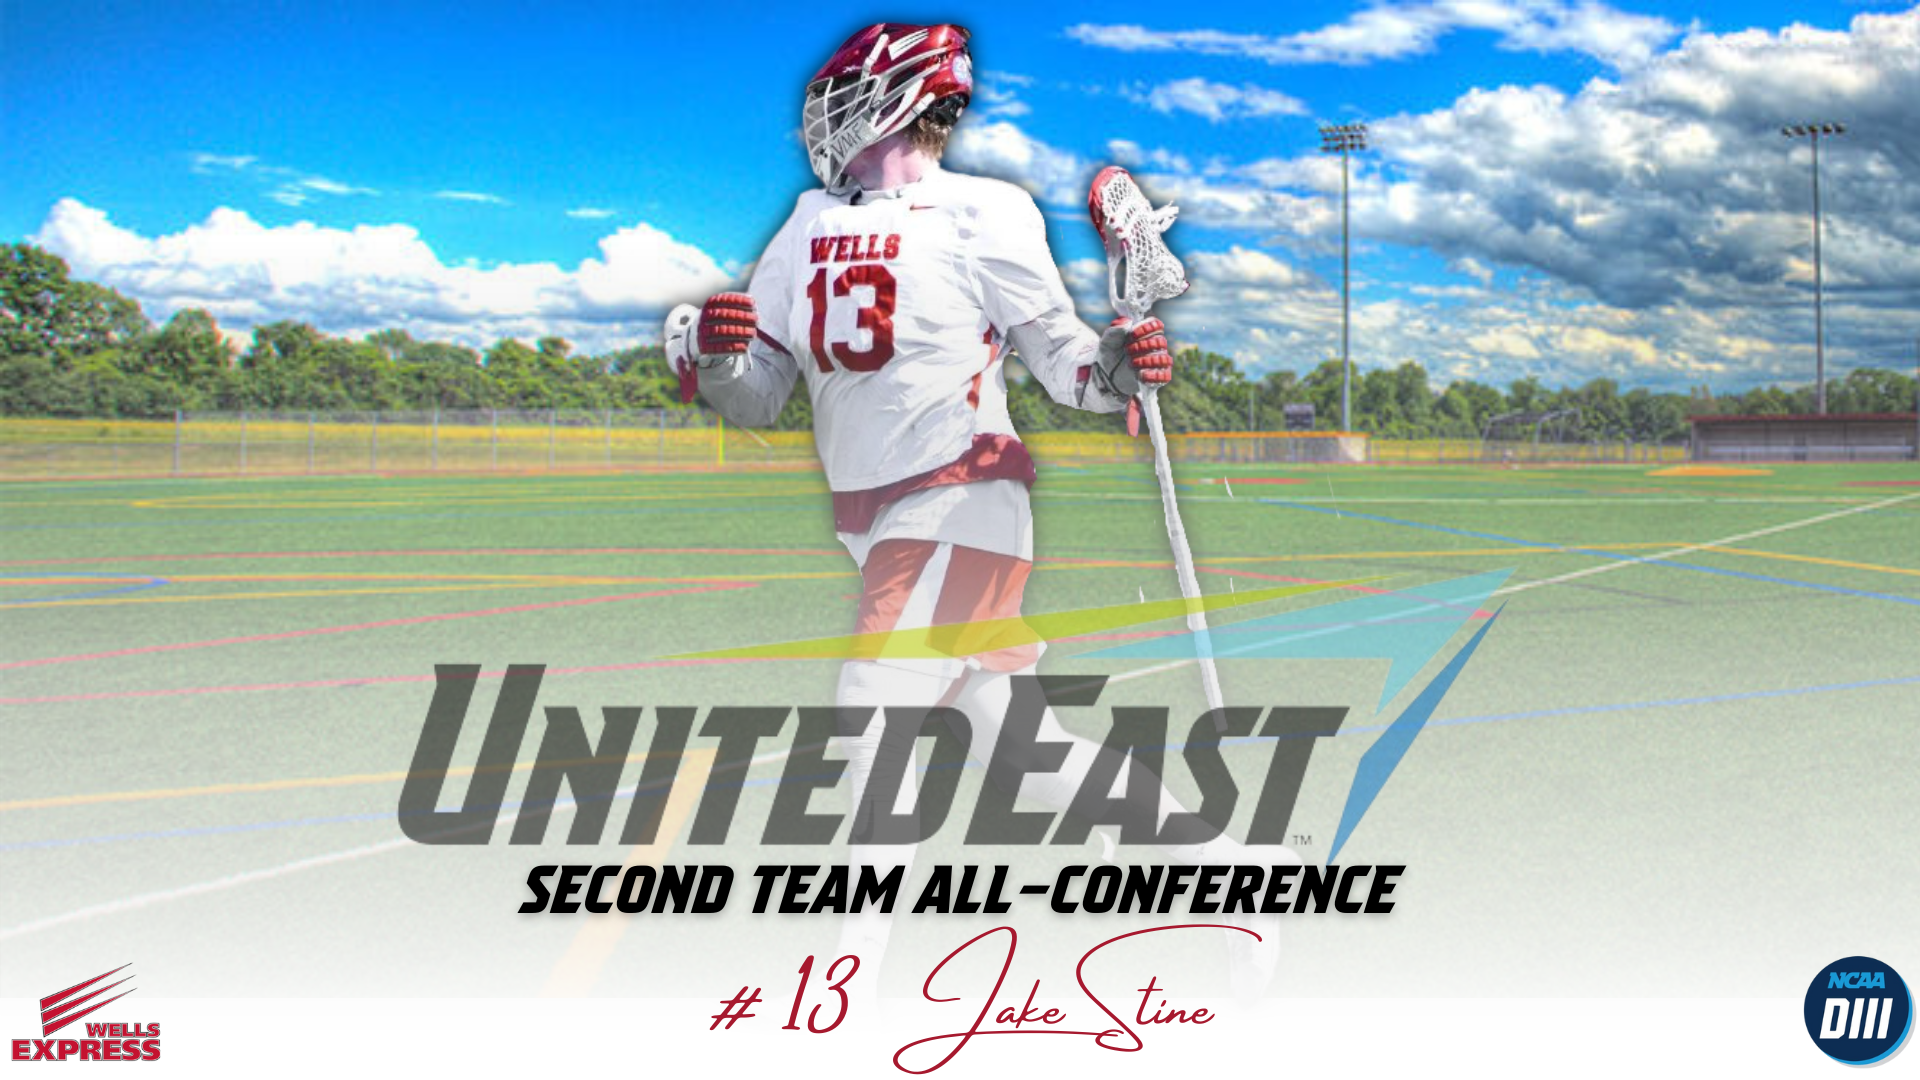 Jake stine second team all conference 